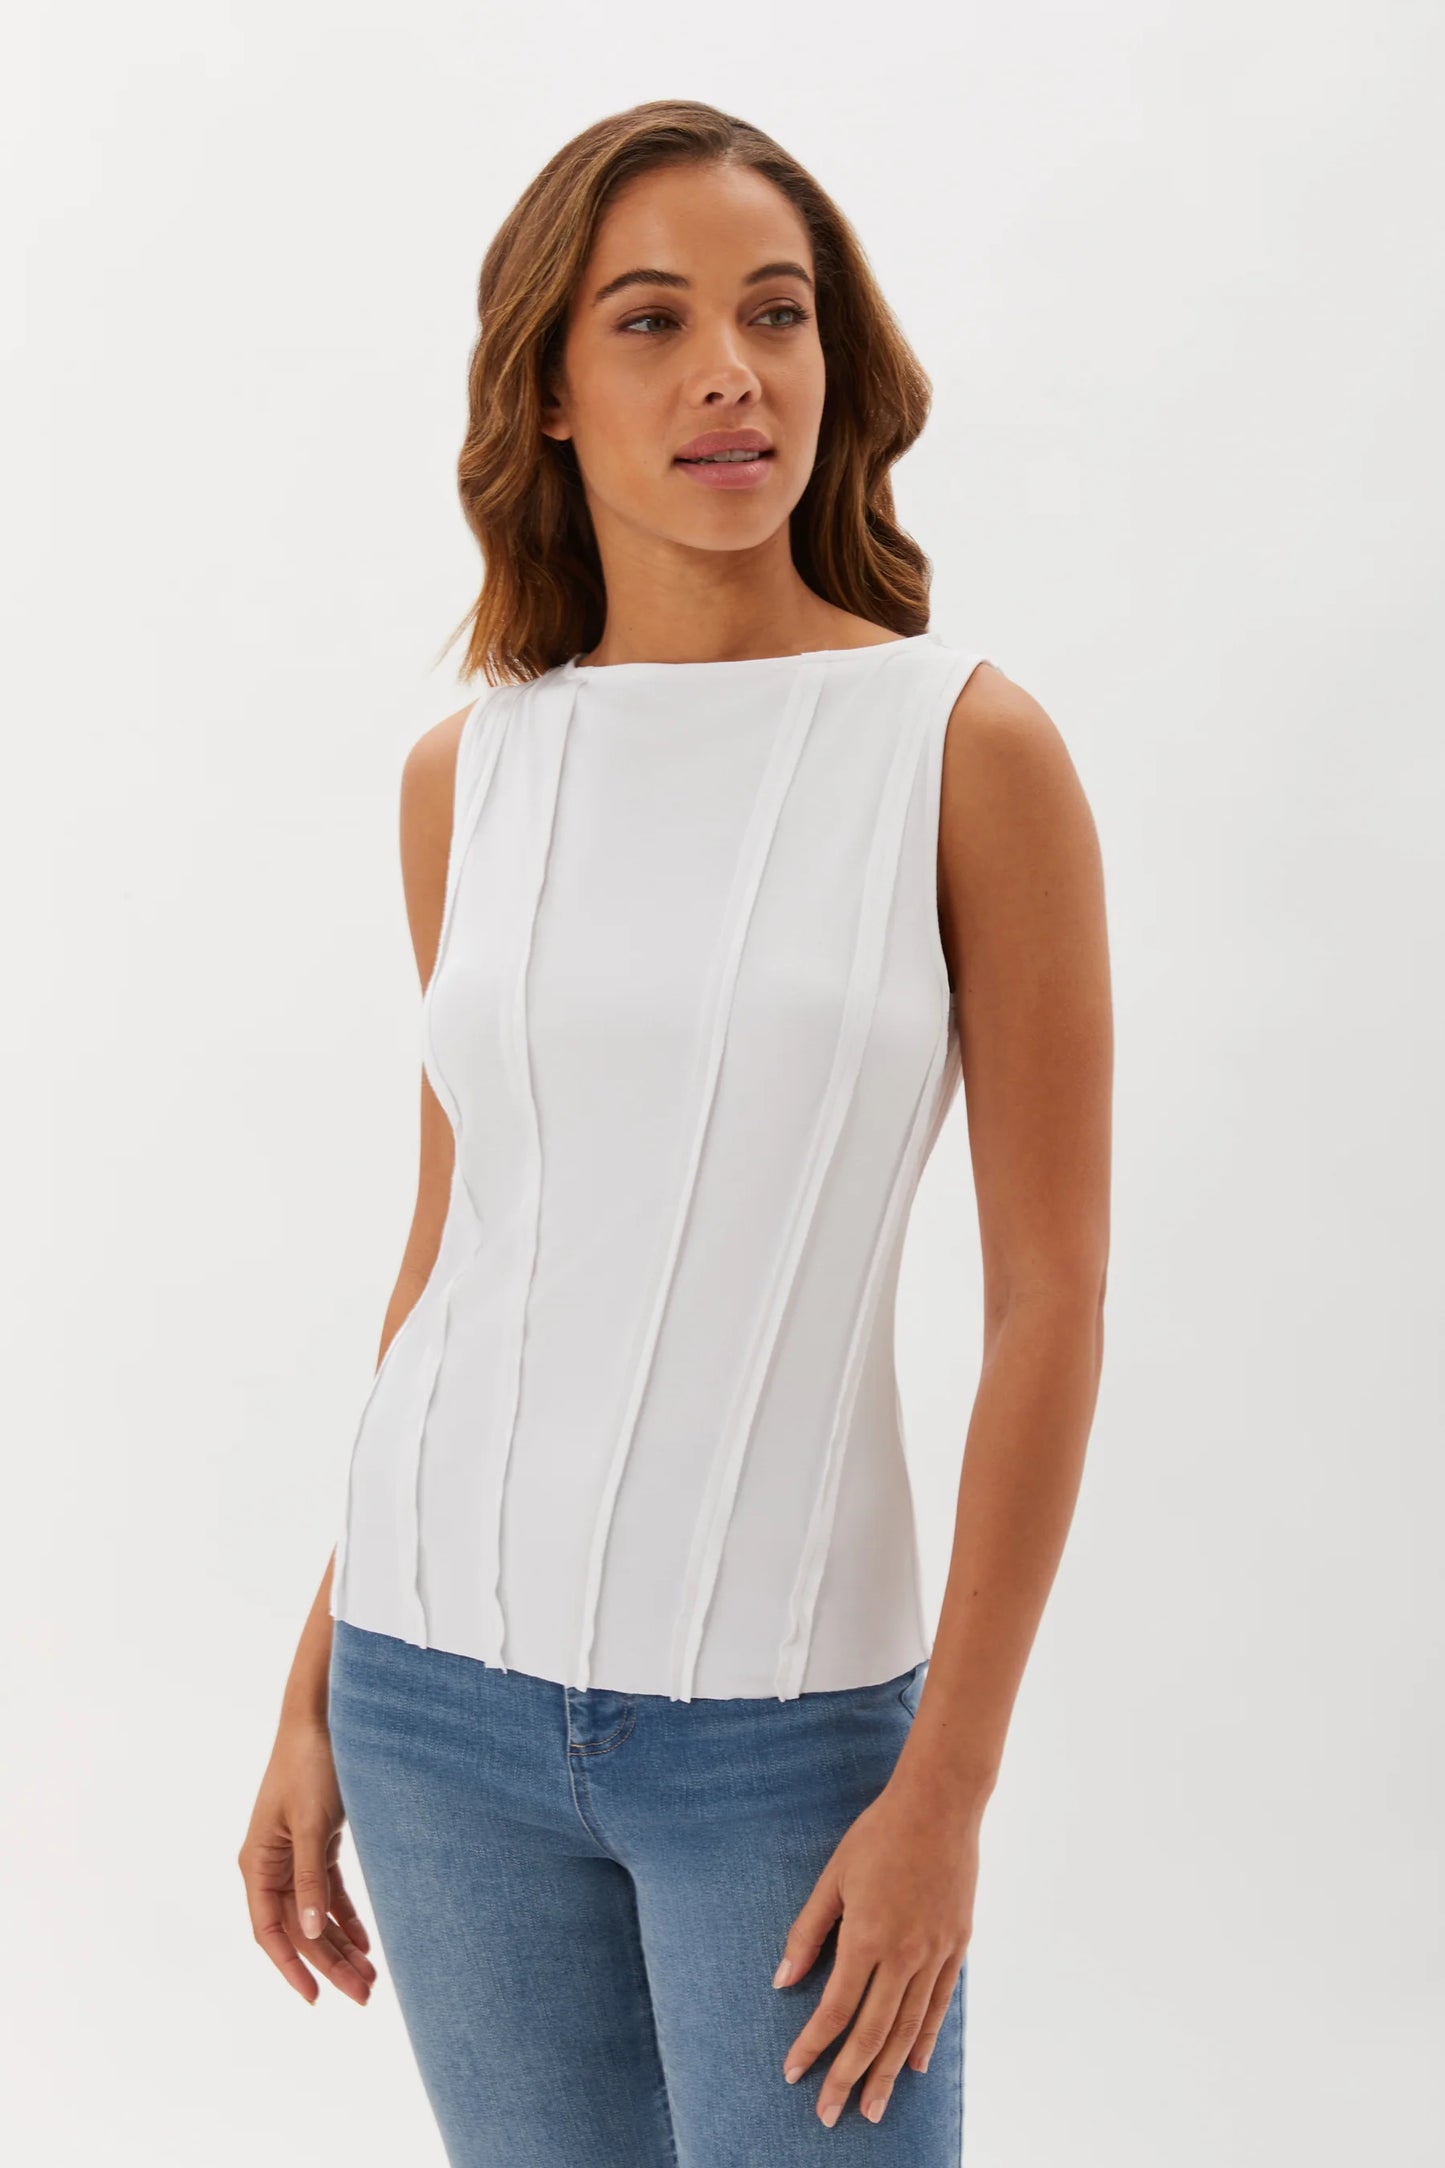 Ecru Style Exposed Seam Knit Shell - White